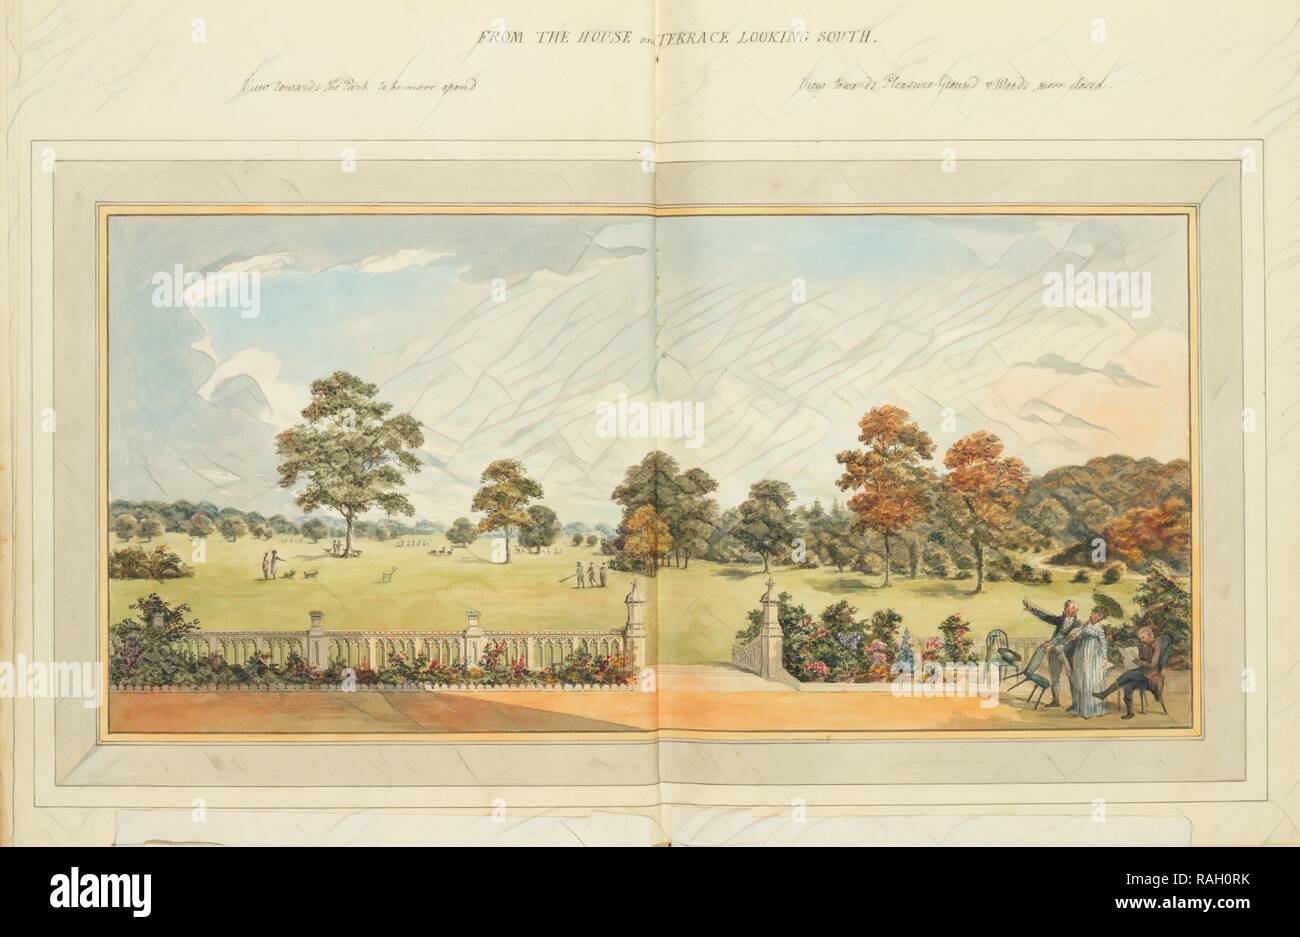 From the house and terrace looking south: overlay down, Humphry Repton architecture and landscape designs, 1807-1813 reimagined Stock Photo